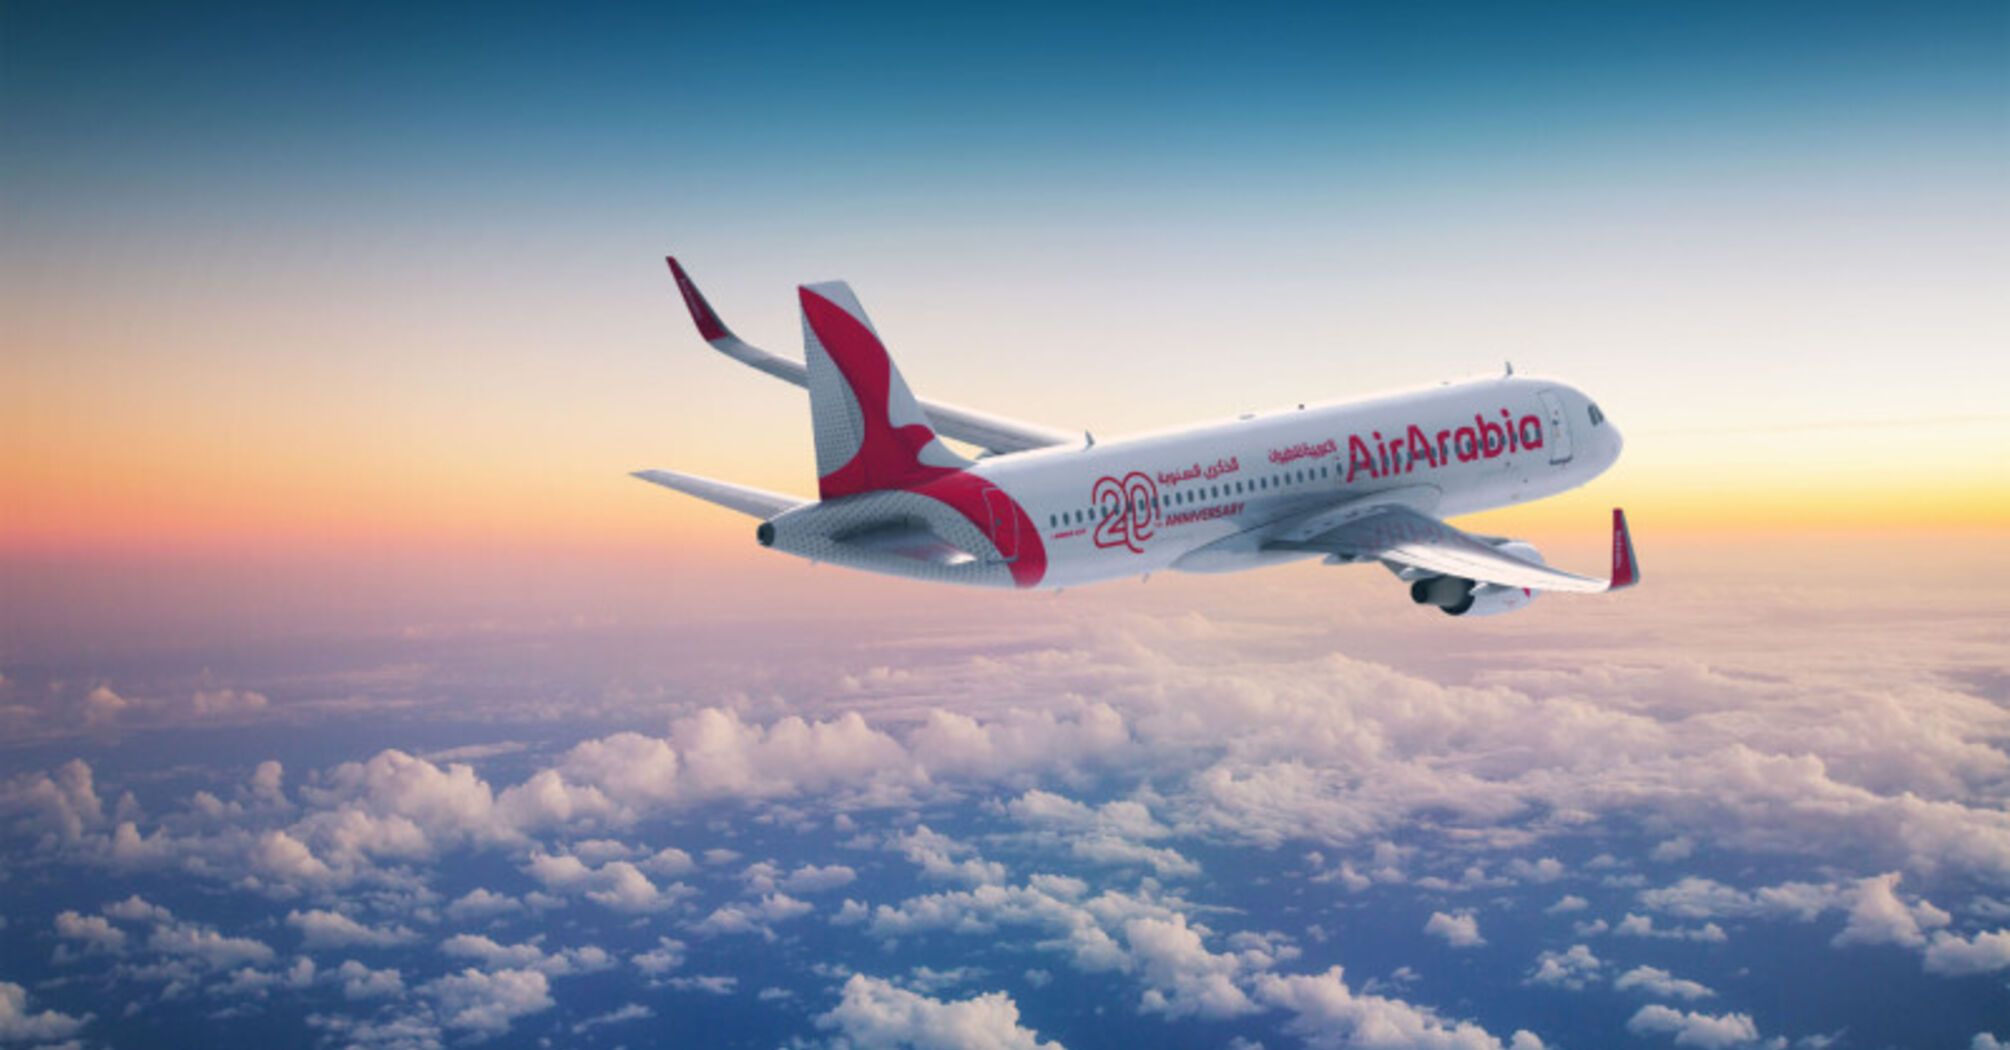 Air Arabia adds flights to Greece this summer